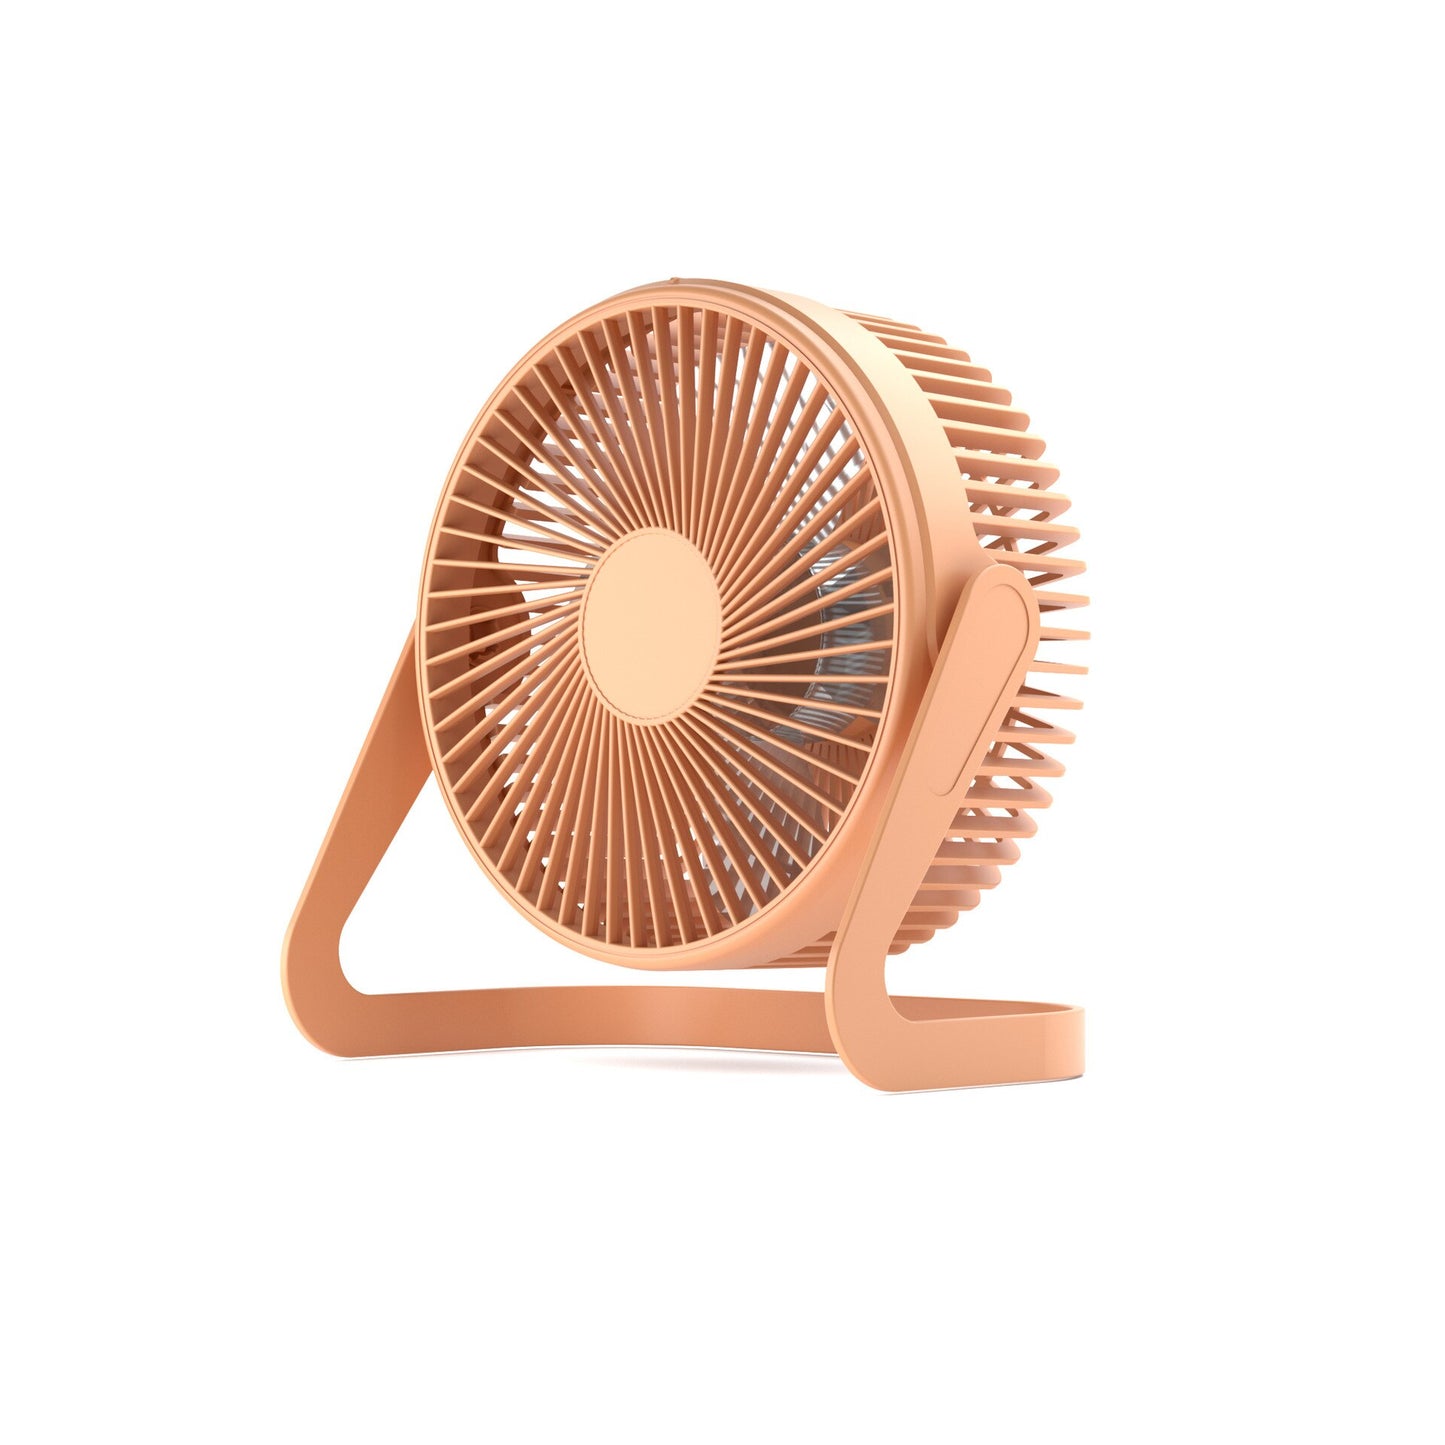 CoolBreeze 5-Inch USB Desktop Fan: Portable, Adjustable, and Silent Air Cooling Solution for Home and Office